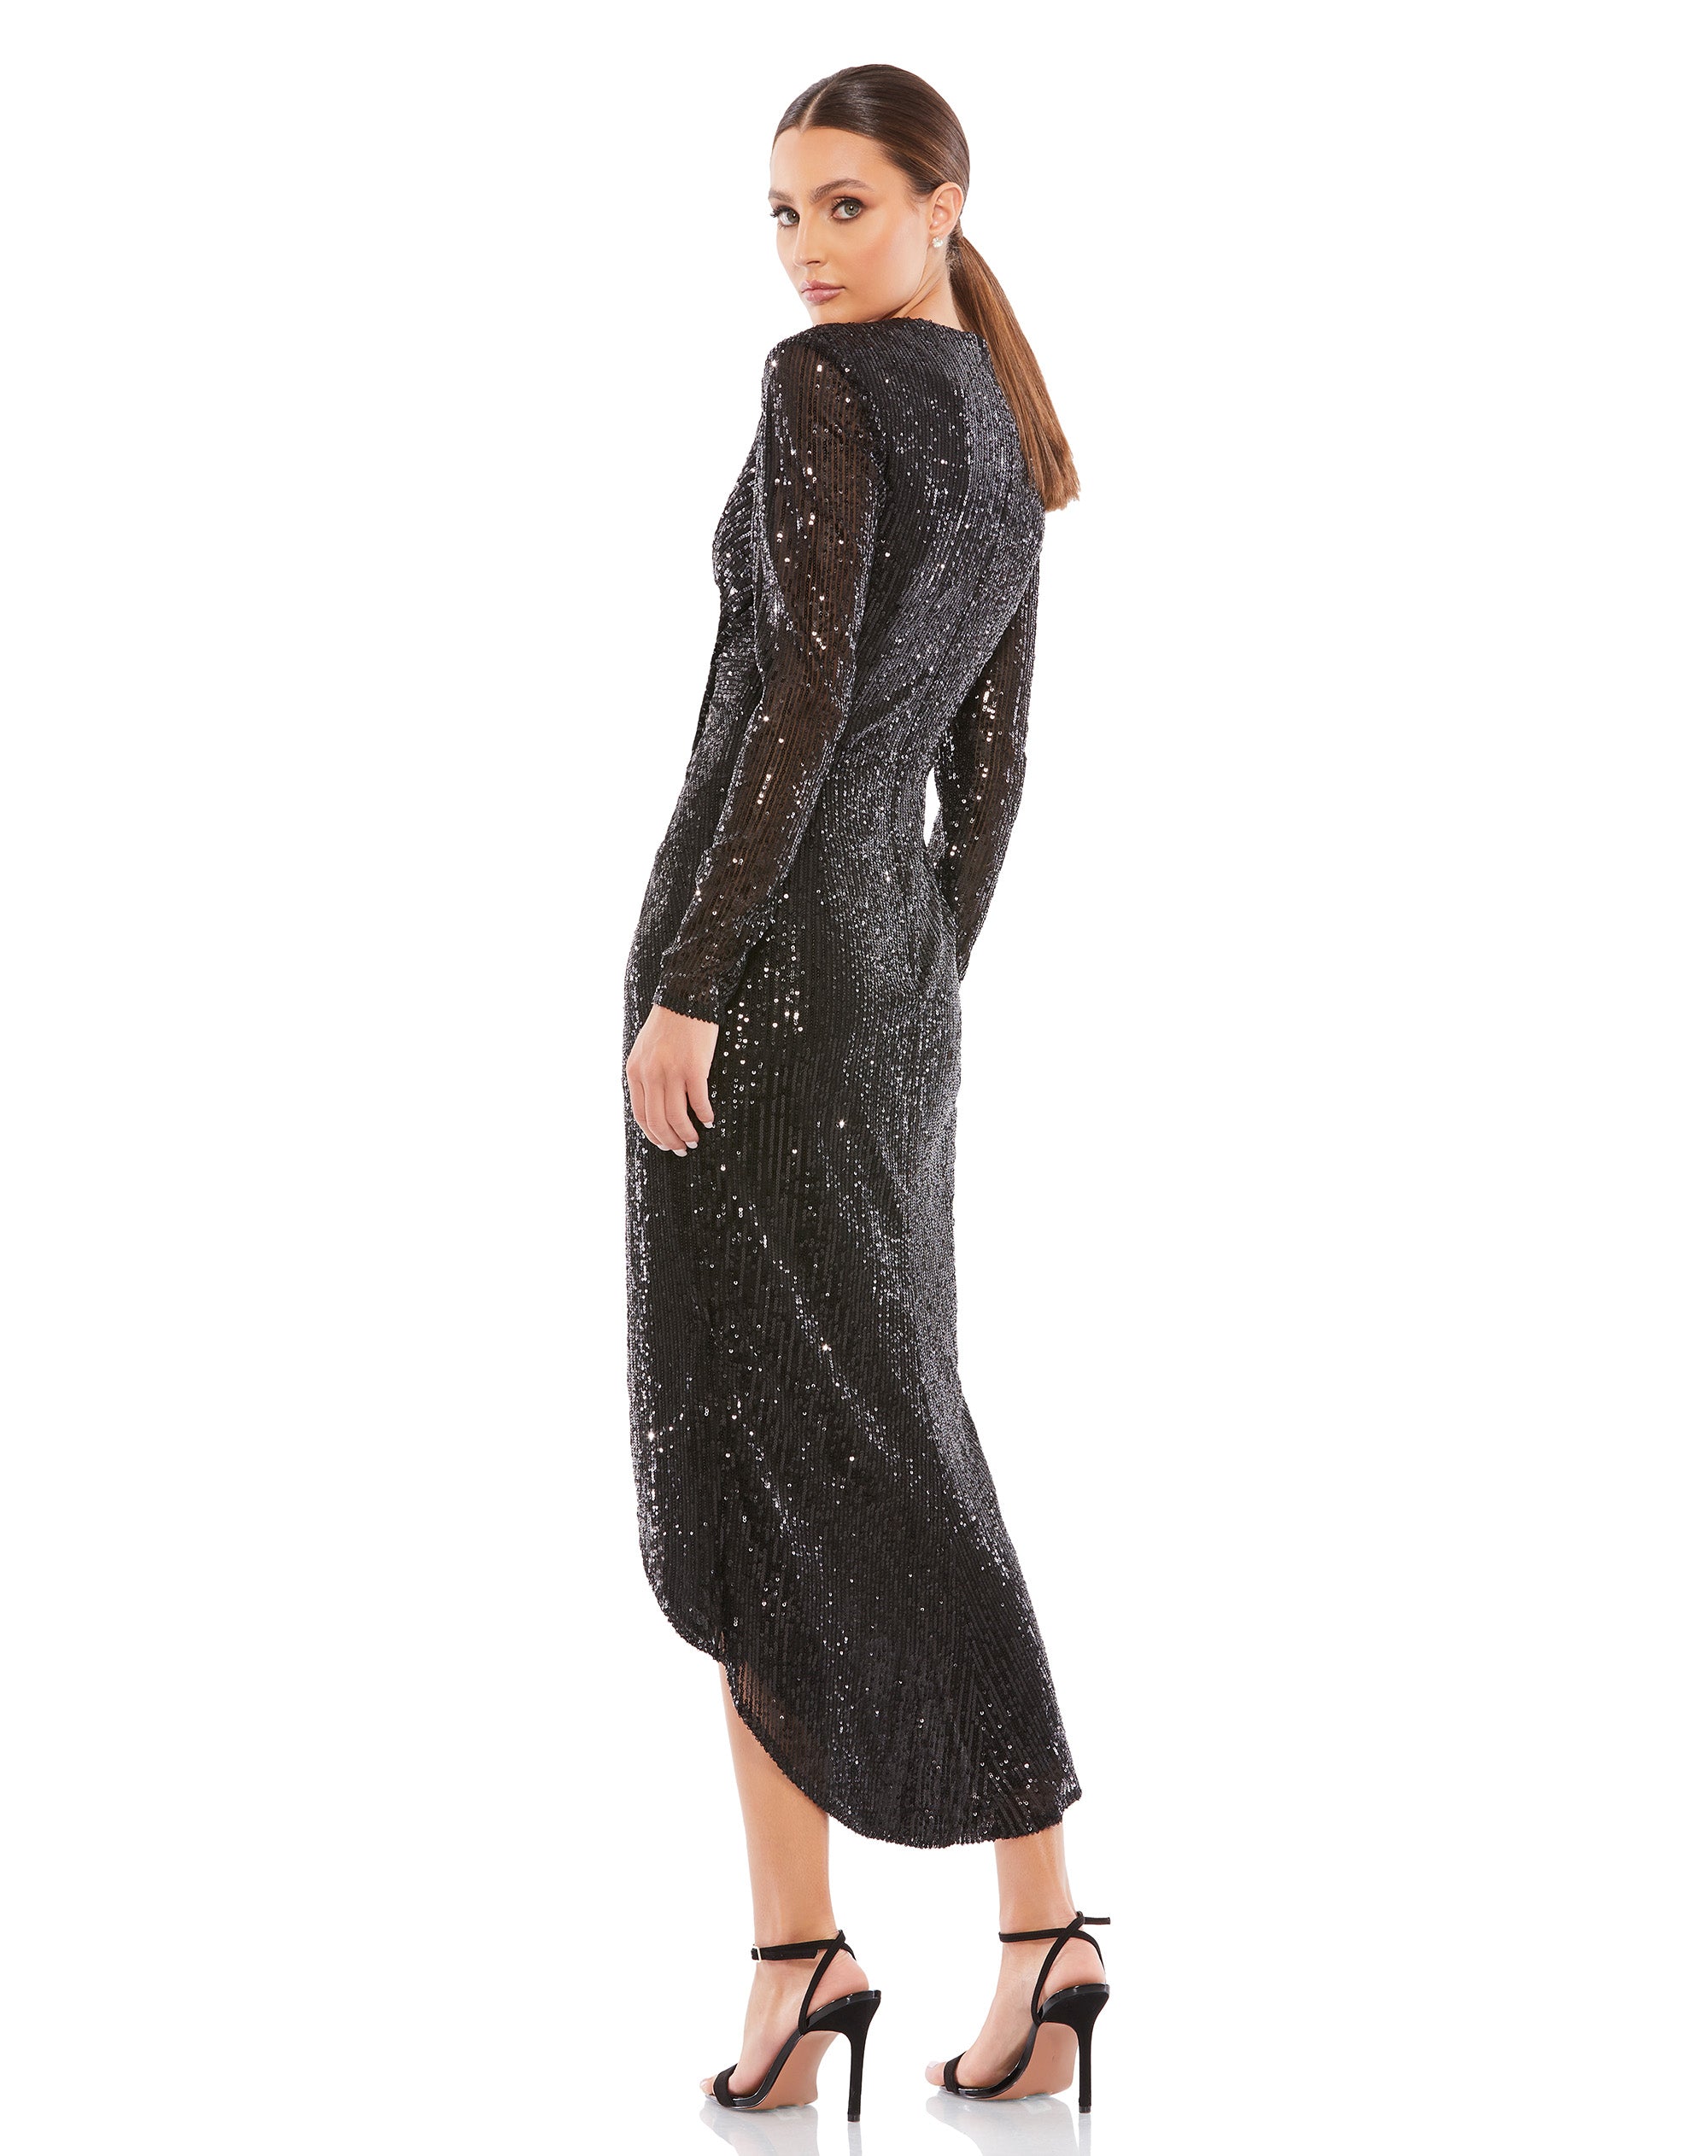 Sequin Knotted Long Sleeve Midi Dress